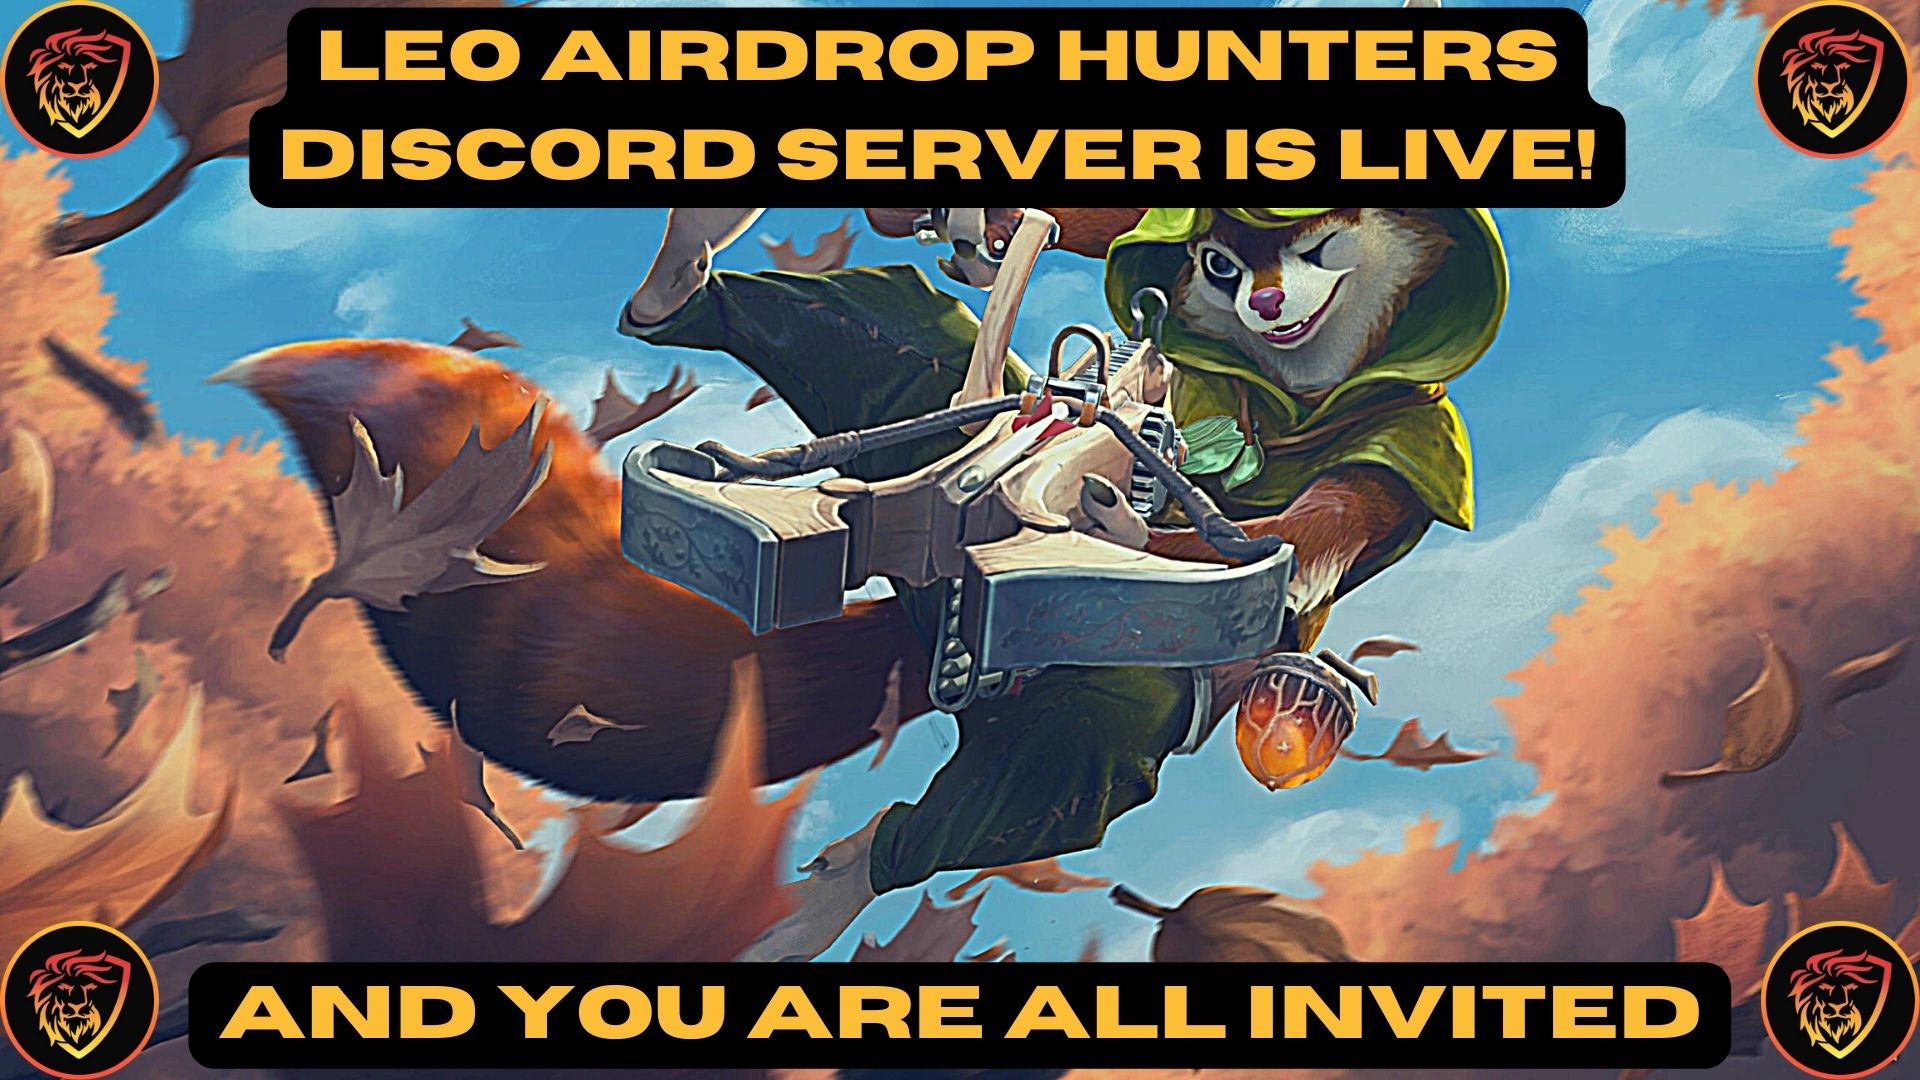 @jerrythefarmer/leo-airdrop-hunters-discord-server-is-now-live-don-t-hunt-alone-hunt-with-frens